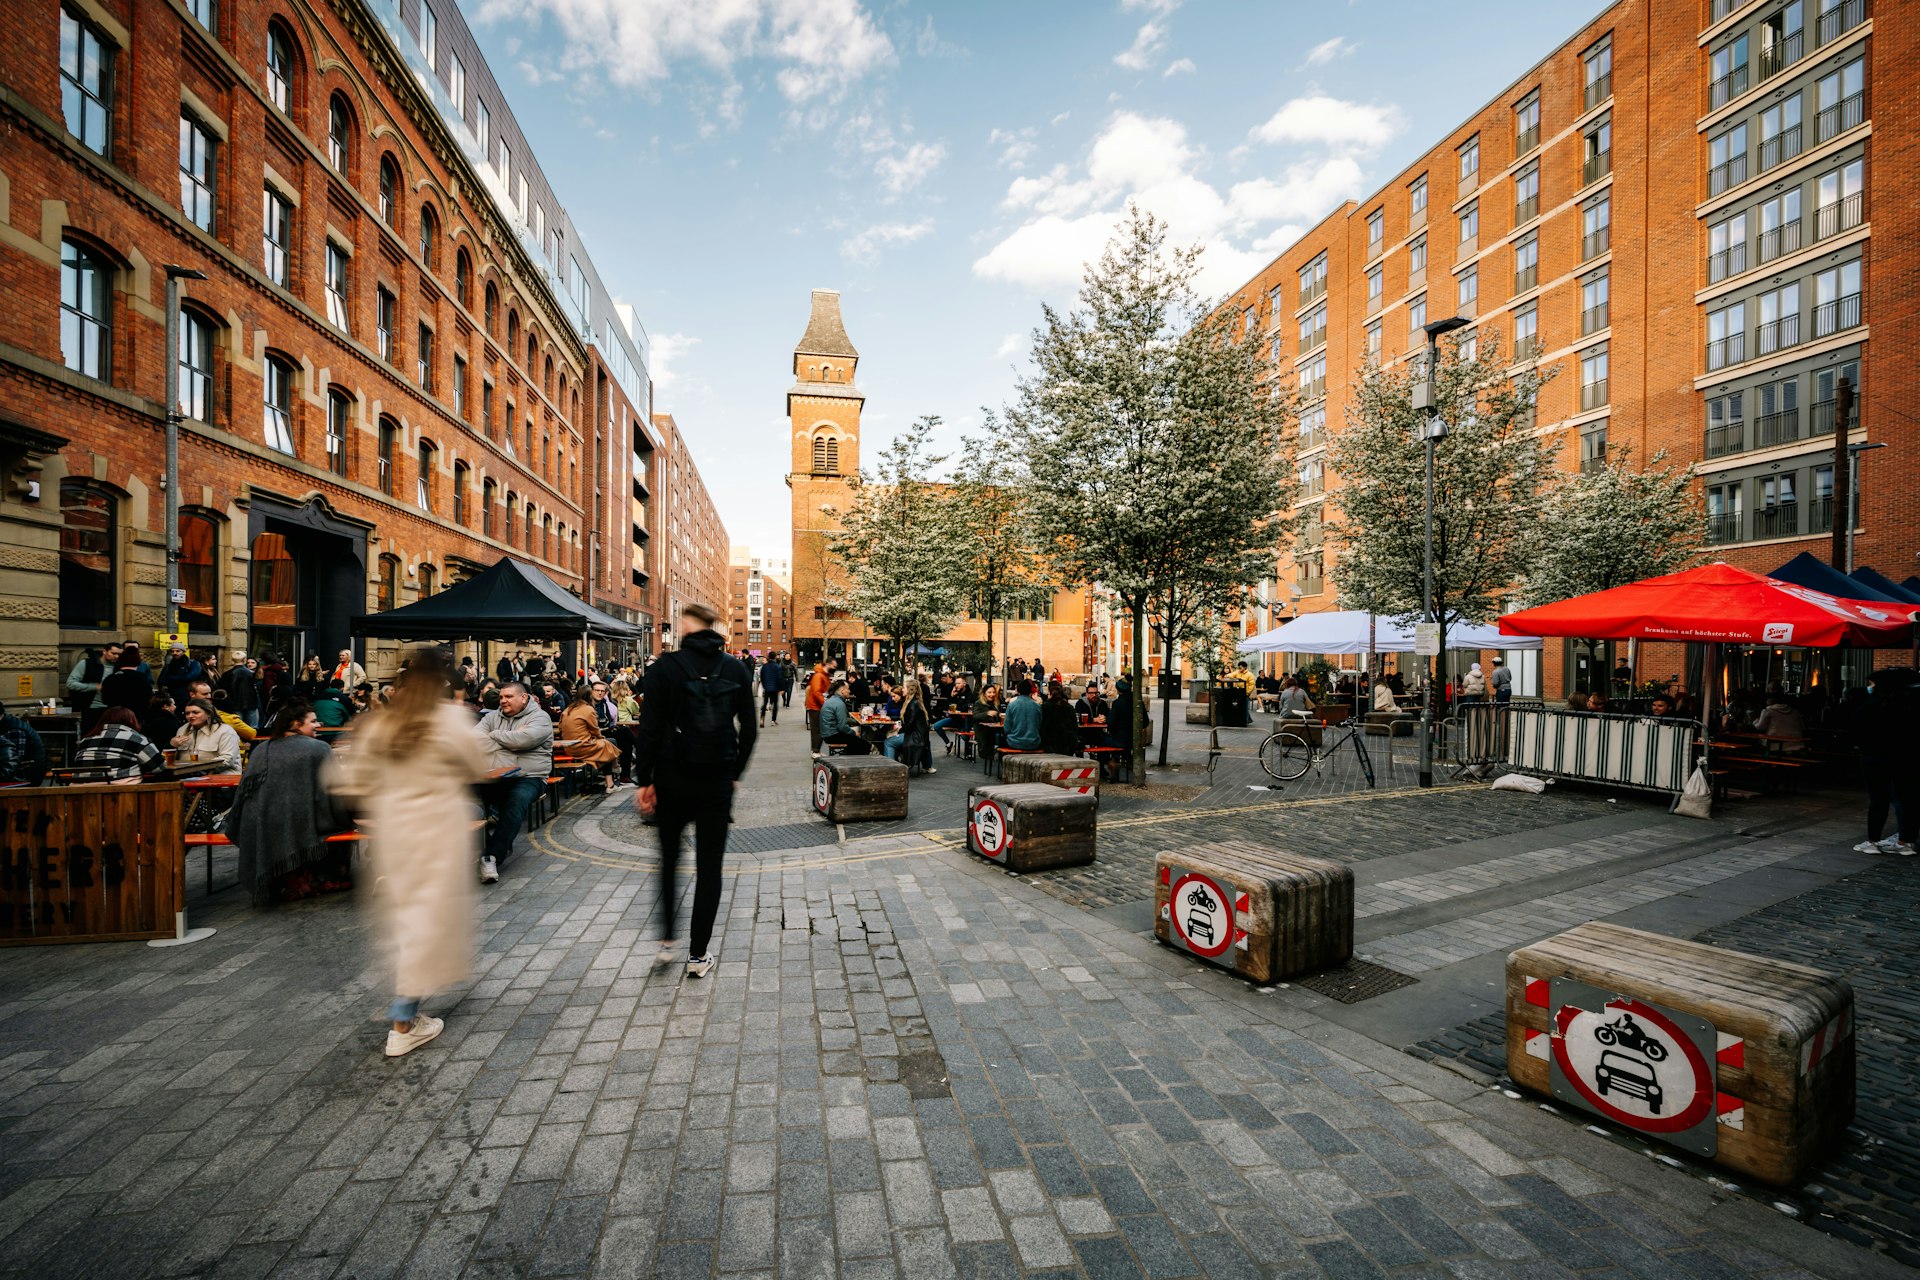 People walking through Cutting Room Square in the Ancoats neighborhood of Manchester, England